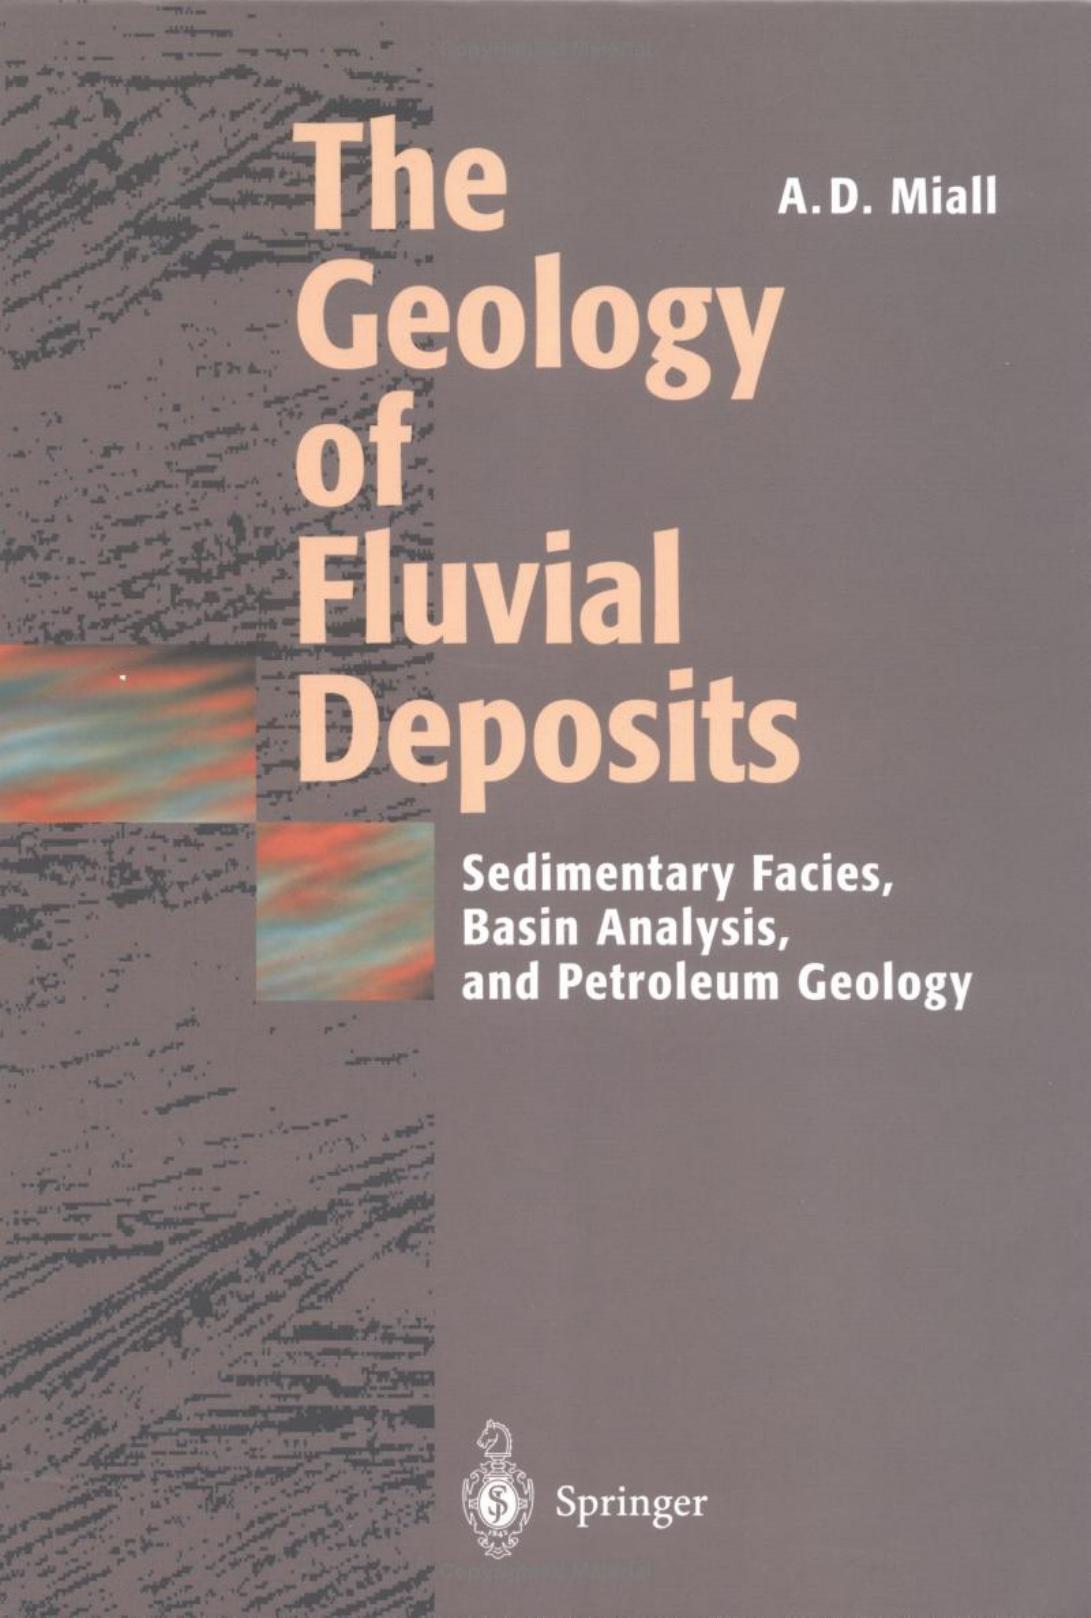 The Geology of Fluvial Deposits Sedimentary Facies, Basin Analysis, and Petroleum Geology 2006